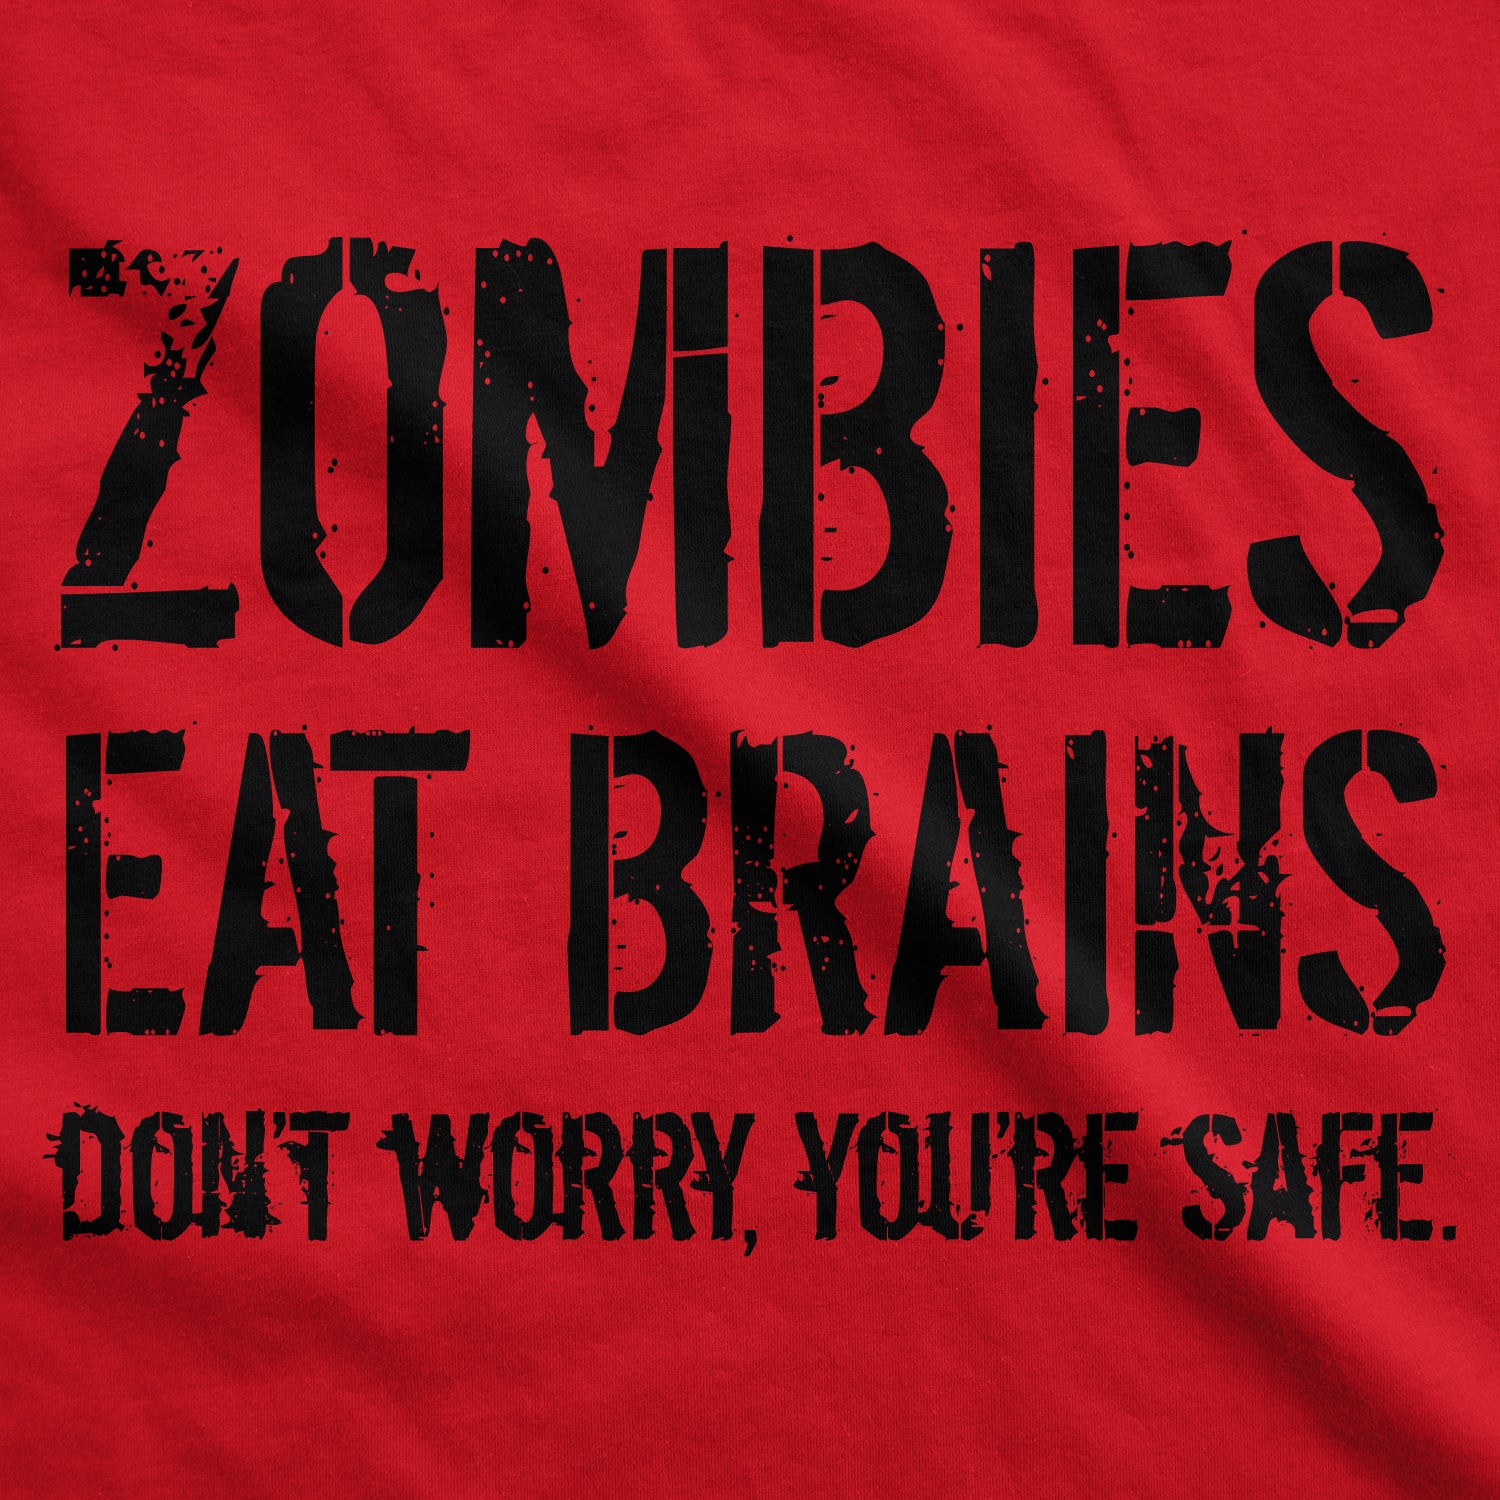 Funny Zombies Eat Brains, You're Safe Womens T Shirt Nerdy Halloween Sarcastic zombie Tee